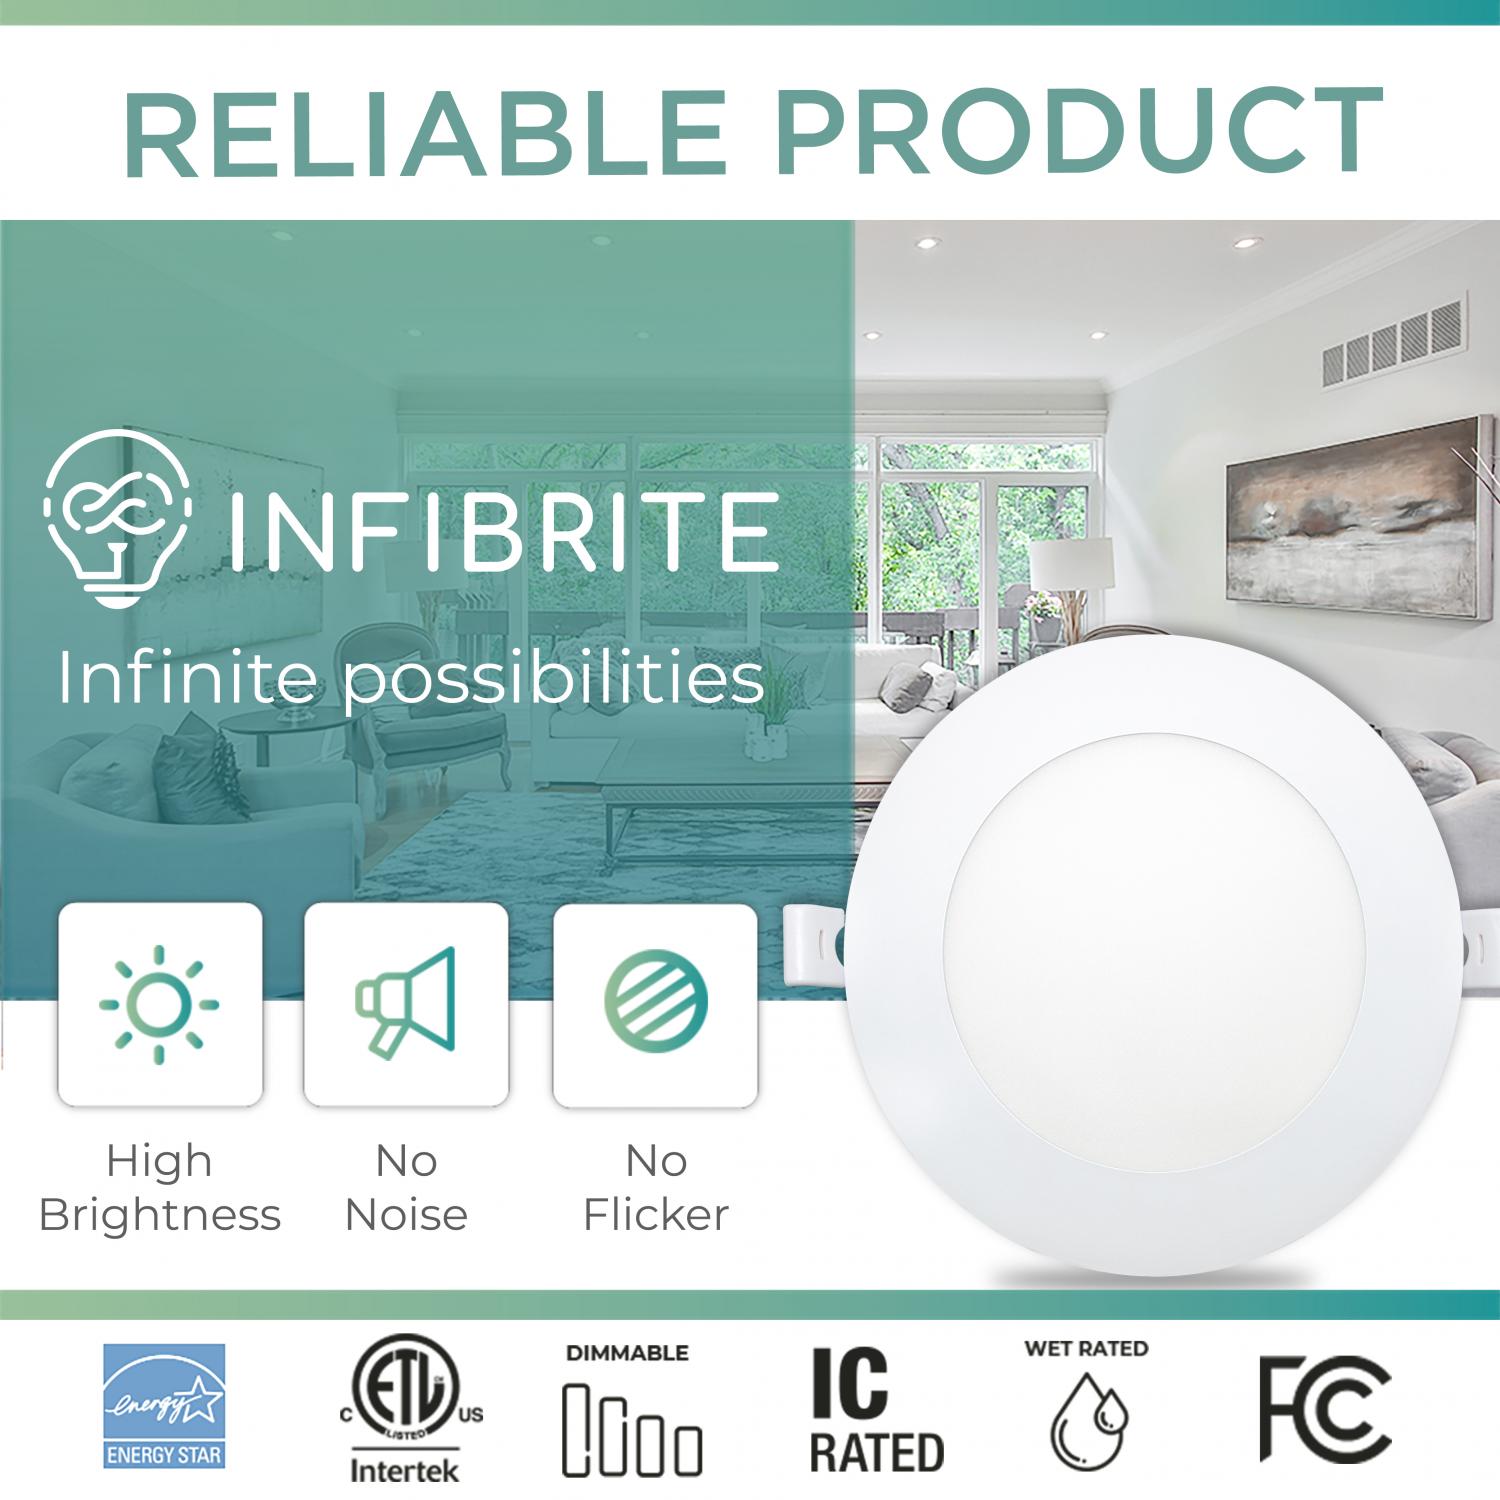 Infibrite 6 Inch 2700K/3000K/3500K/4000K/5000K Selectable 12W 1050LM Ultra-Slim LED Ceiling Light with Junction Box, Flush Mount, Dimmable, Fixture for Bedroom, Wet Rated for Bathroom, Easy Install, 110W Eqv, ETL & Energy Star, US Company (6 Pack)